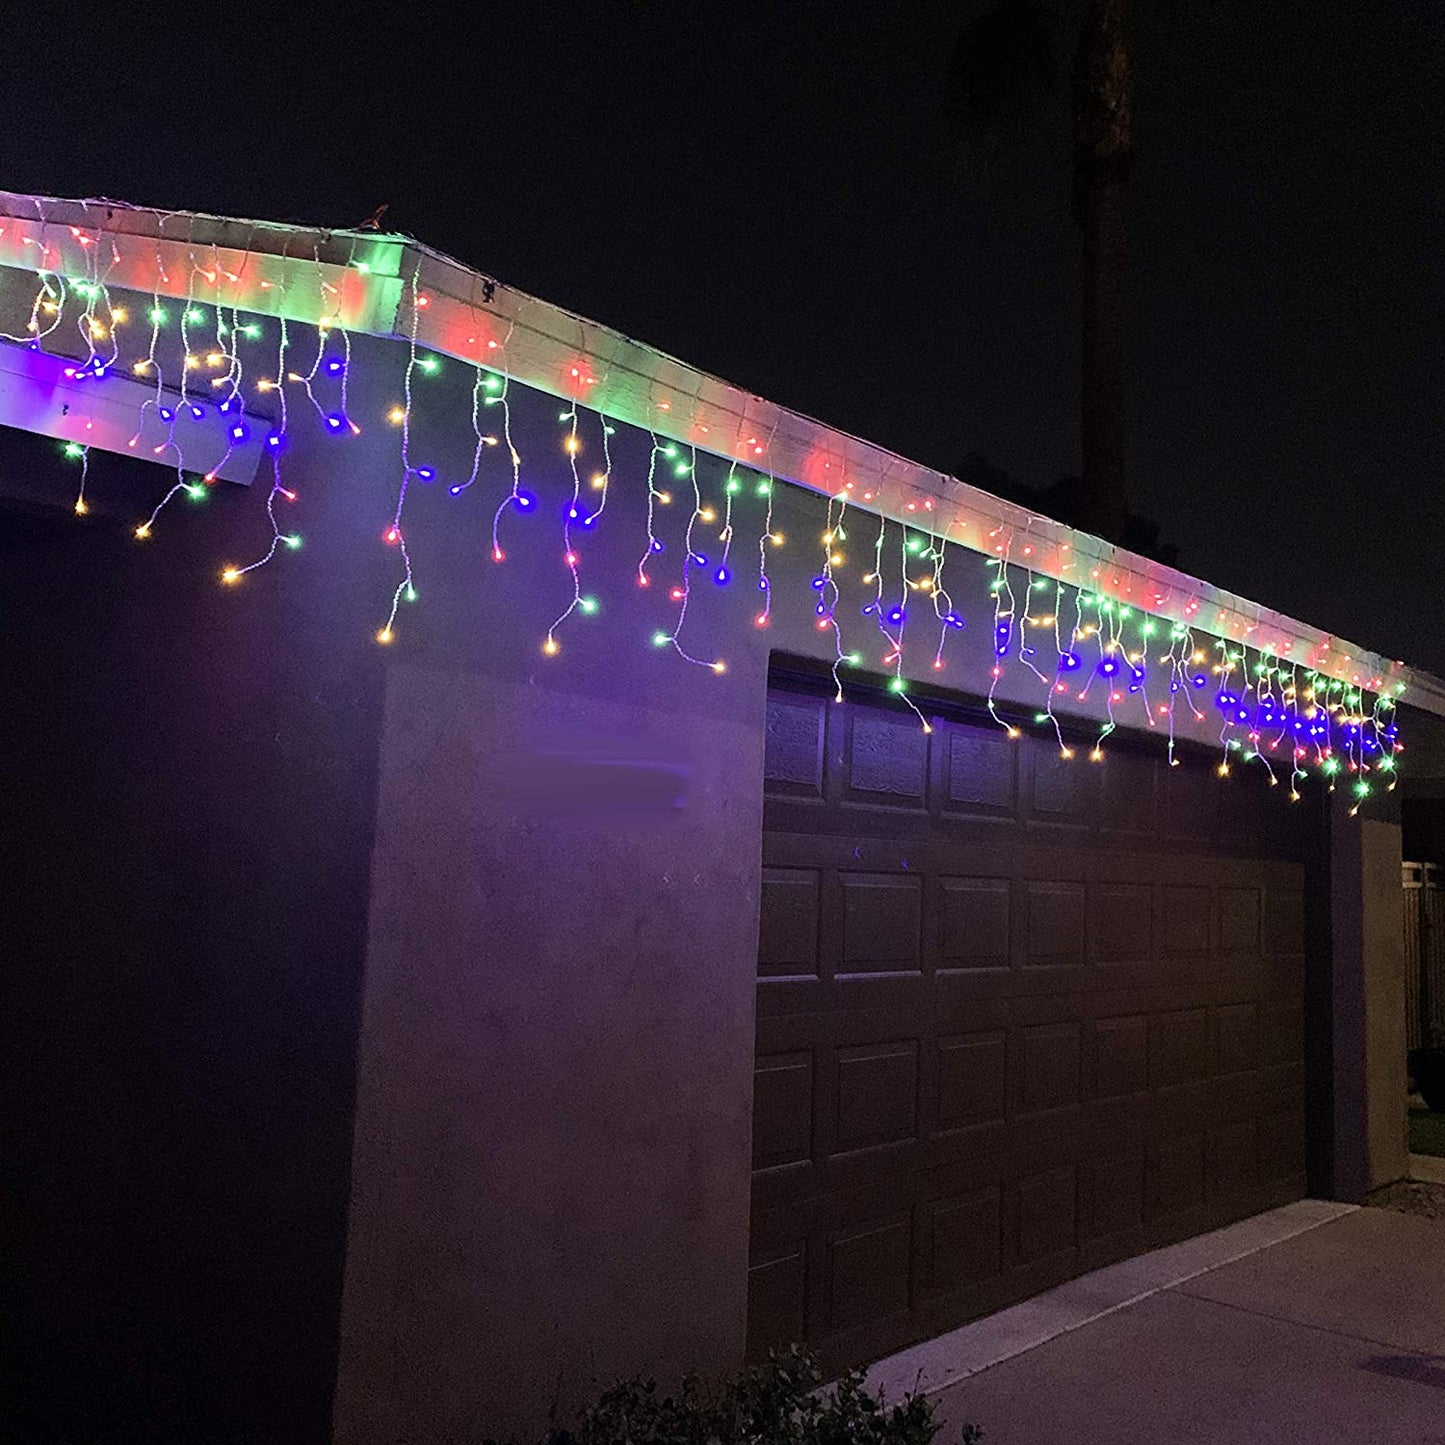 416 LED Icicle Lights, Multicolor